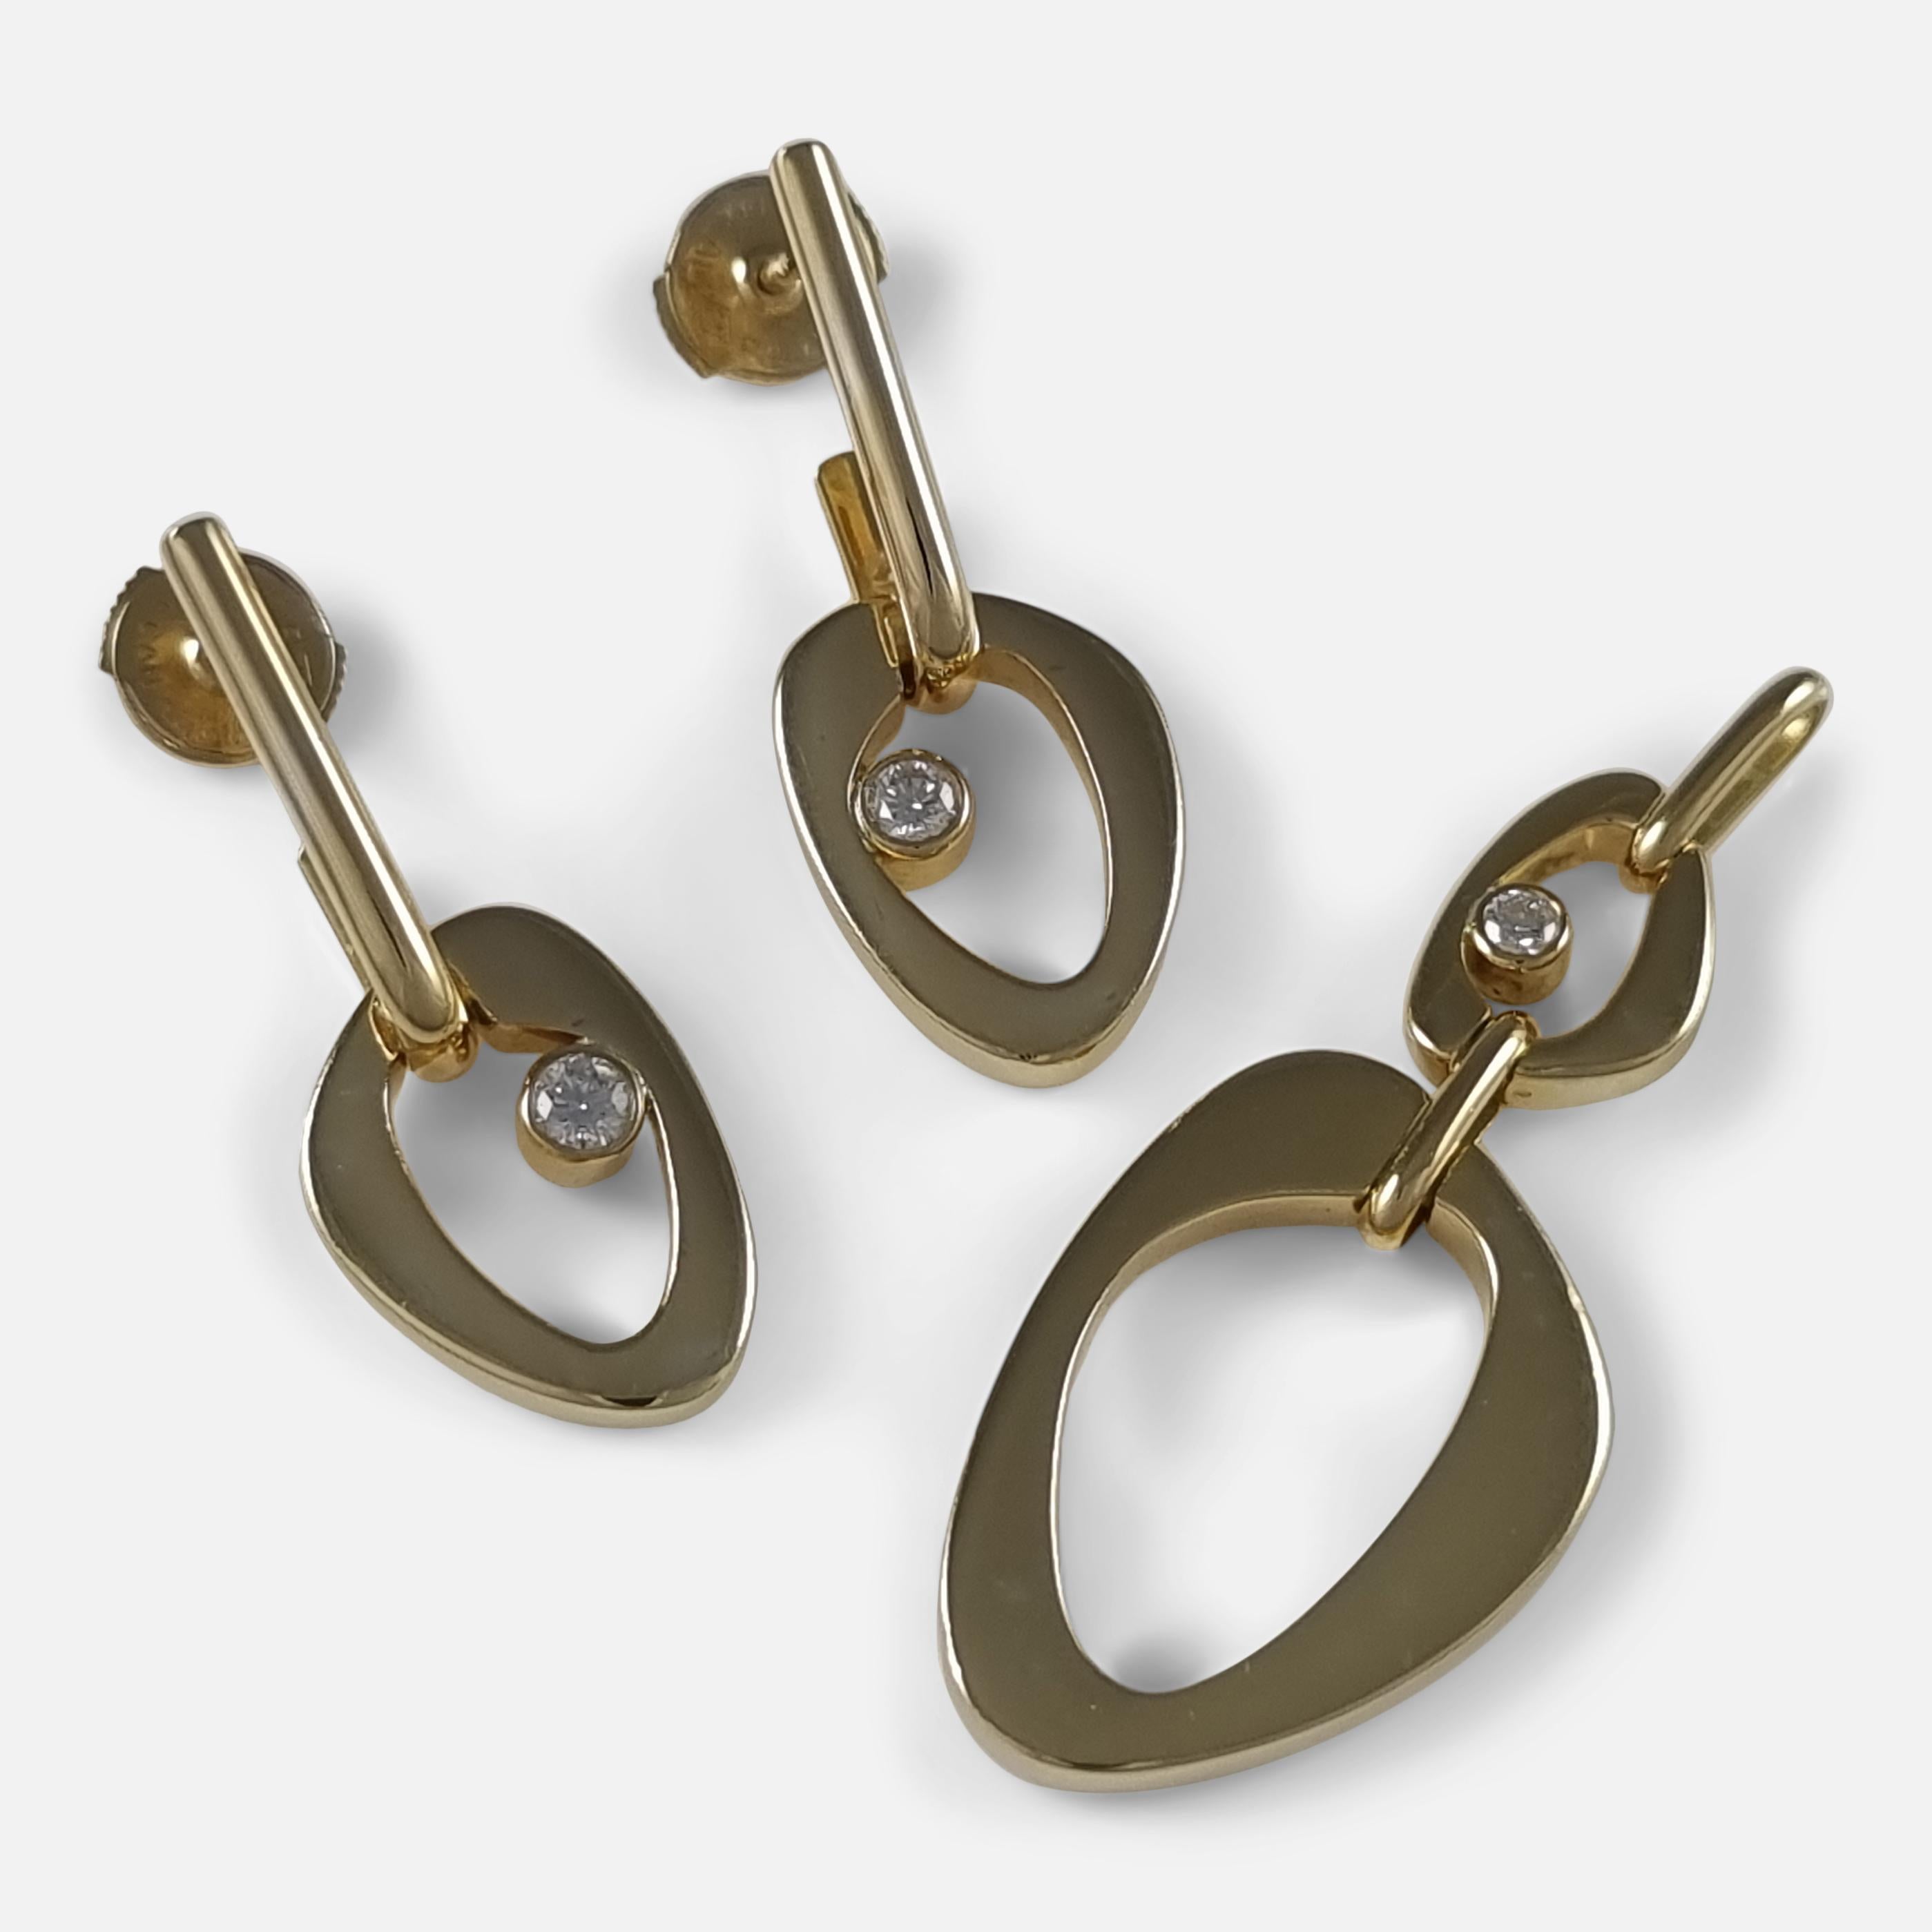 An 18ct yellow gold and diamond pendant and earrings set, designed by Lina Falkesgaard for Georg Jensen. 

The pendant is stamped with the Georg Jensen within dotted oval mark, '750', 'Denmark', and '1502'. The pair of earrings are stamped with the